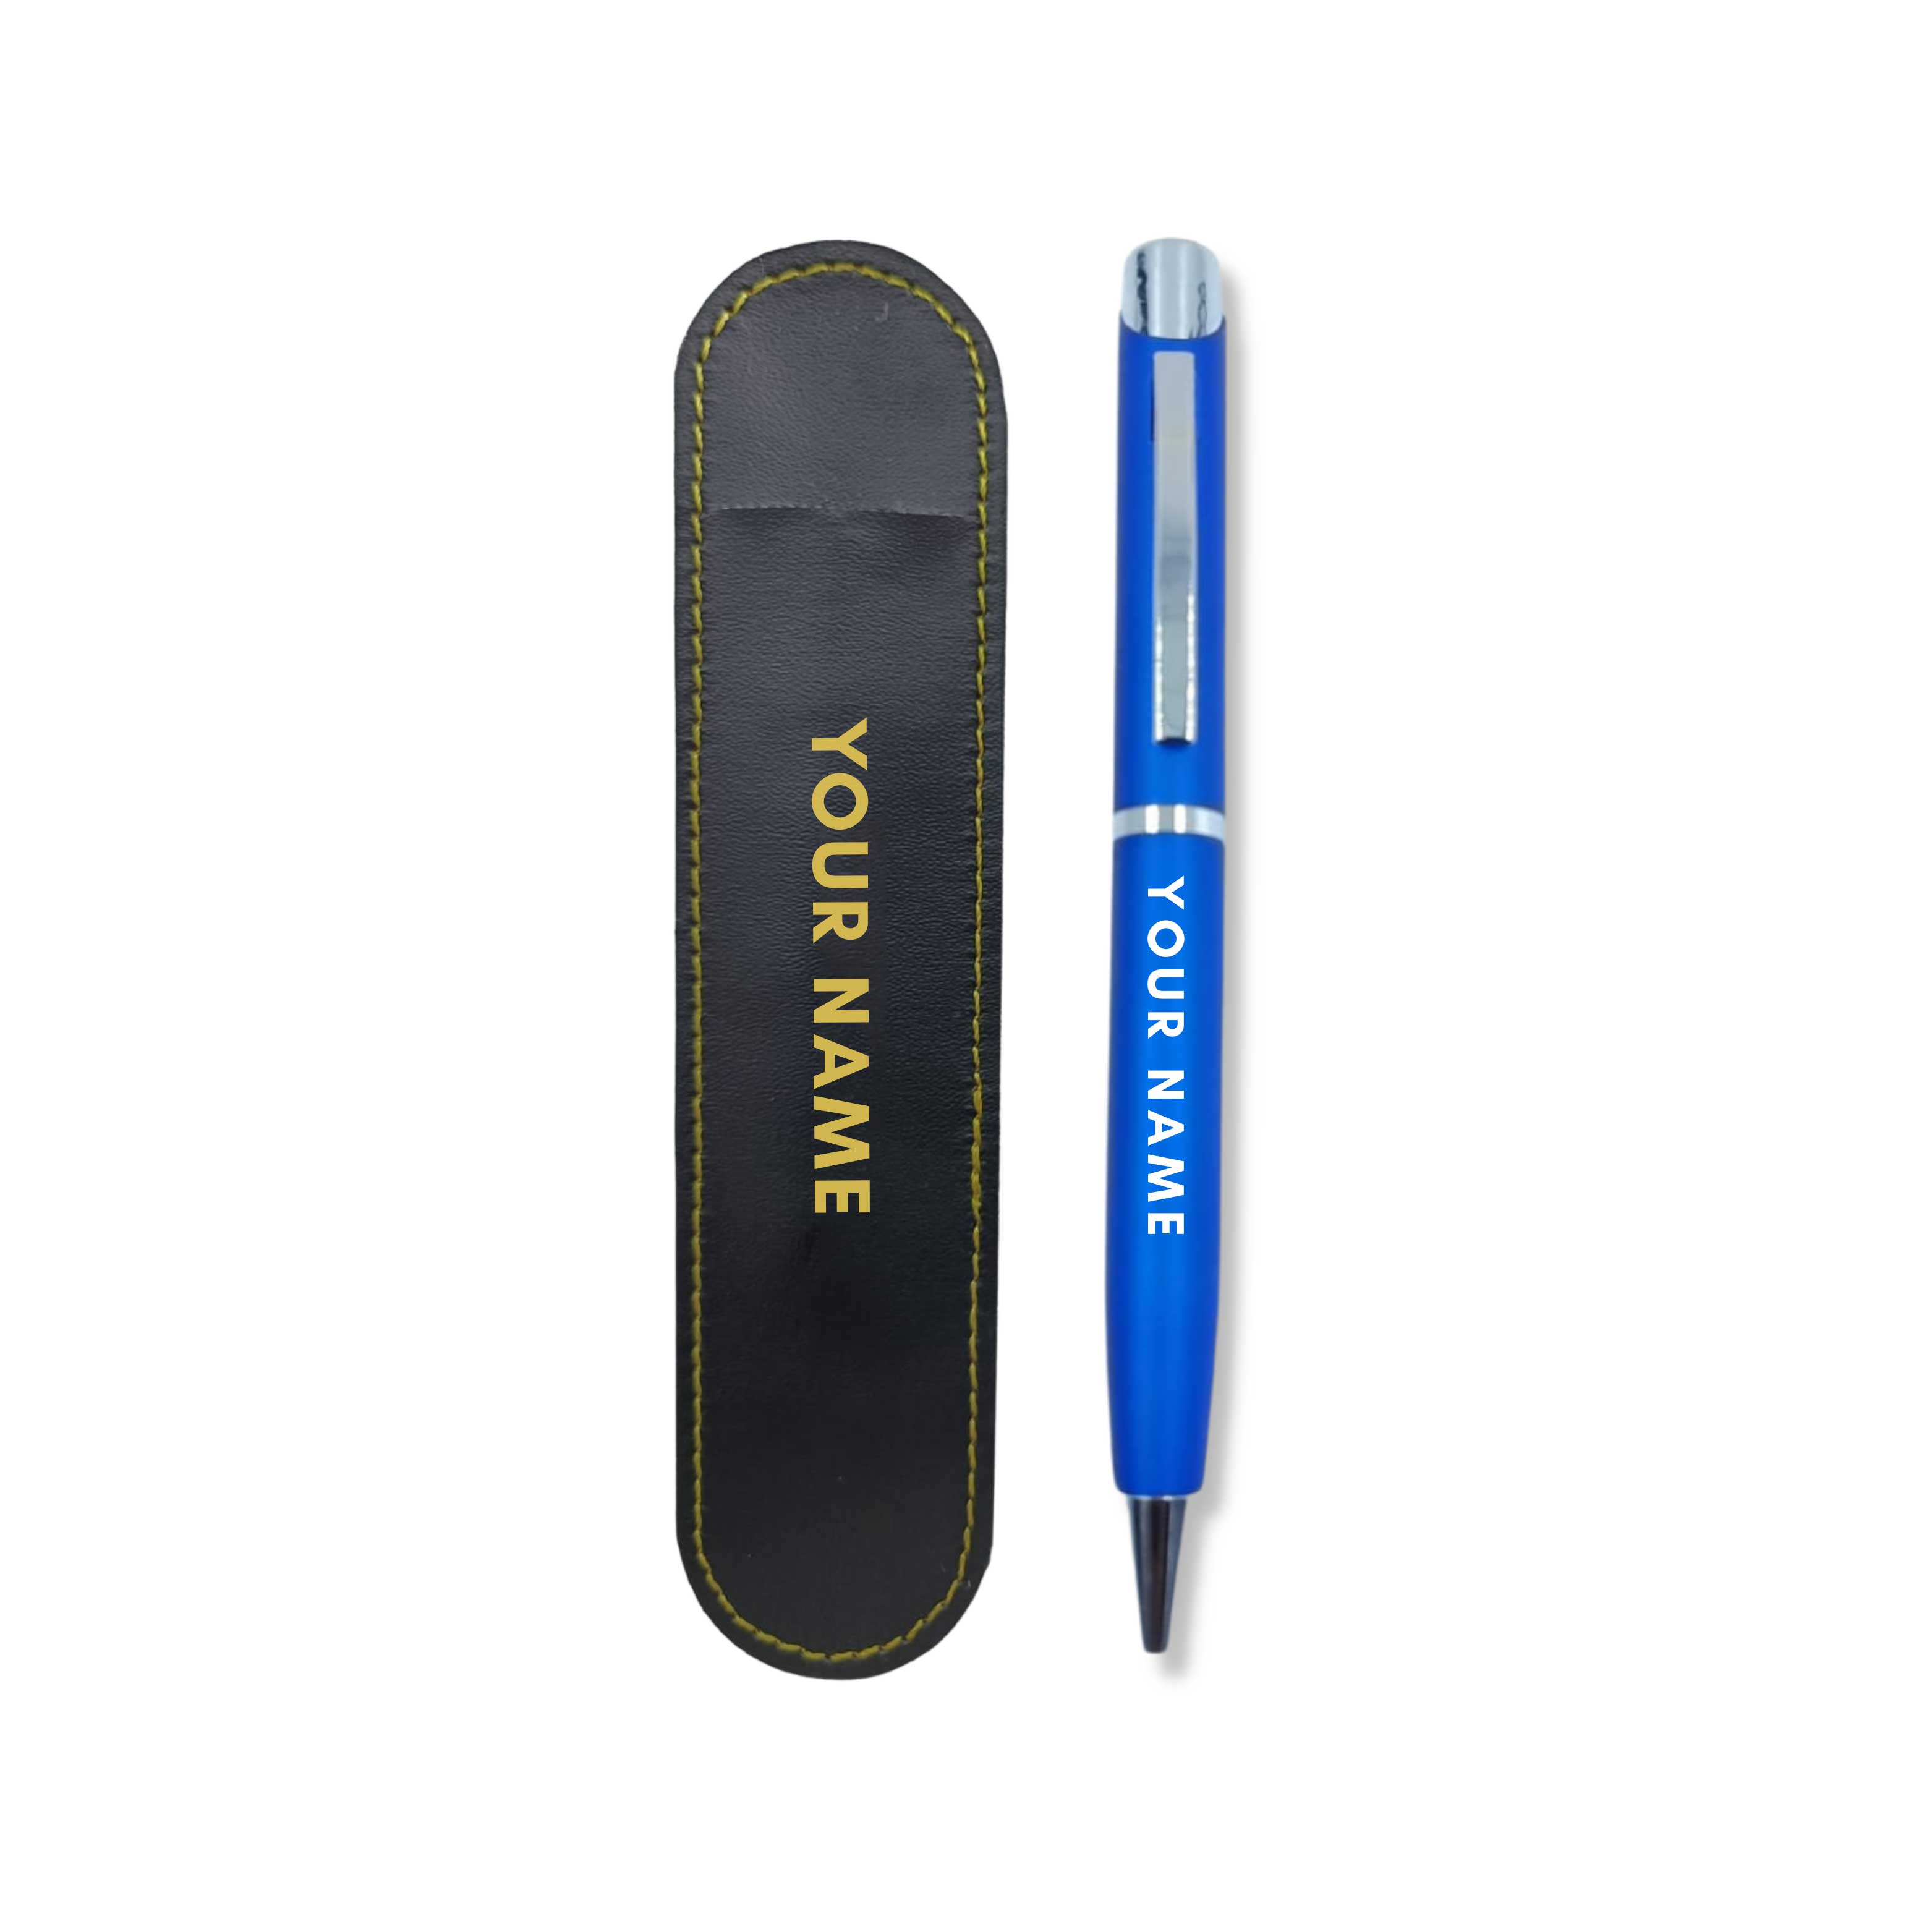 PARTY PENS THE P3 STORE The P3 Store-Personalized Name Engraved Metal Ball  Pen&Key Chin Gift Set For Gifting With Box,Name Printed On Body Pack Of  1,Blue : Amazon.in: Office Products